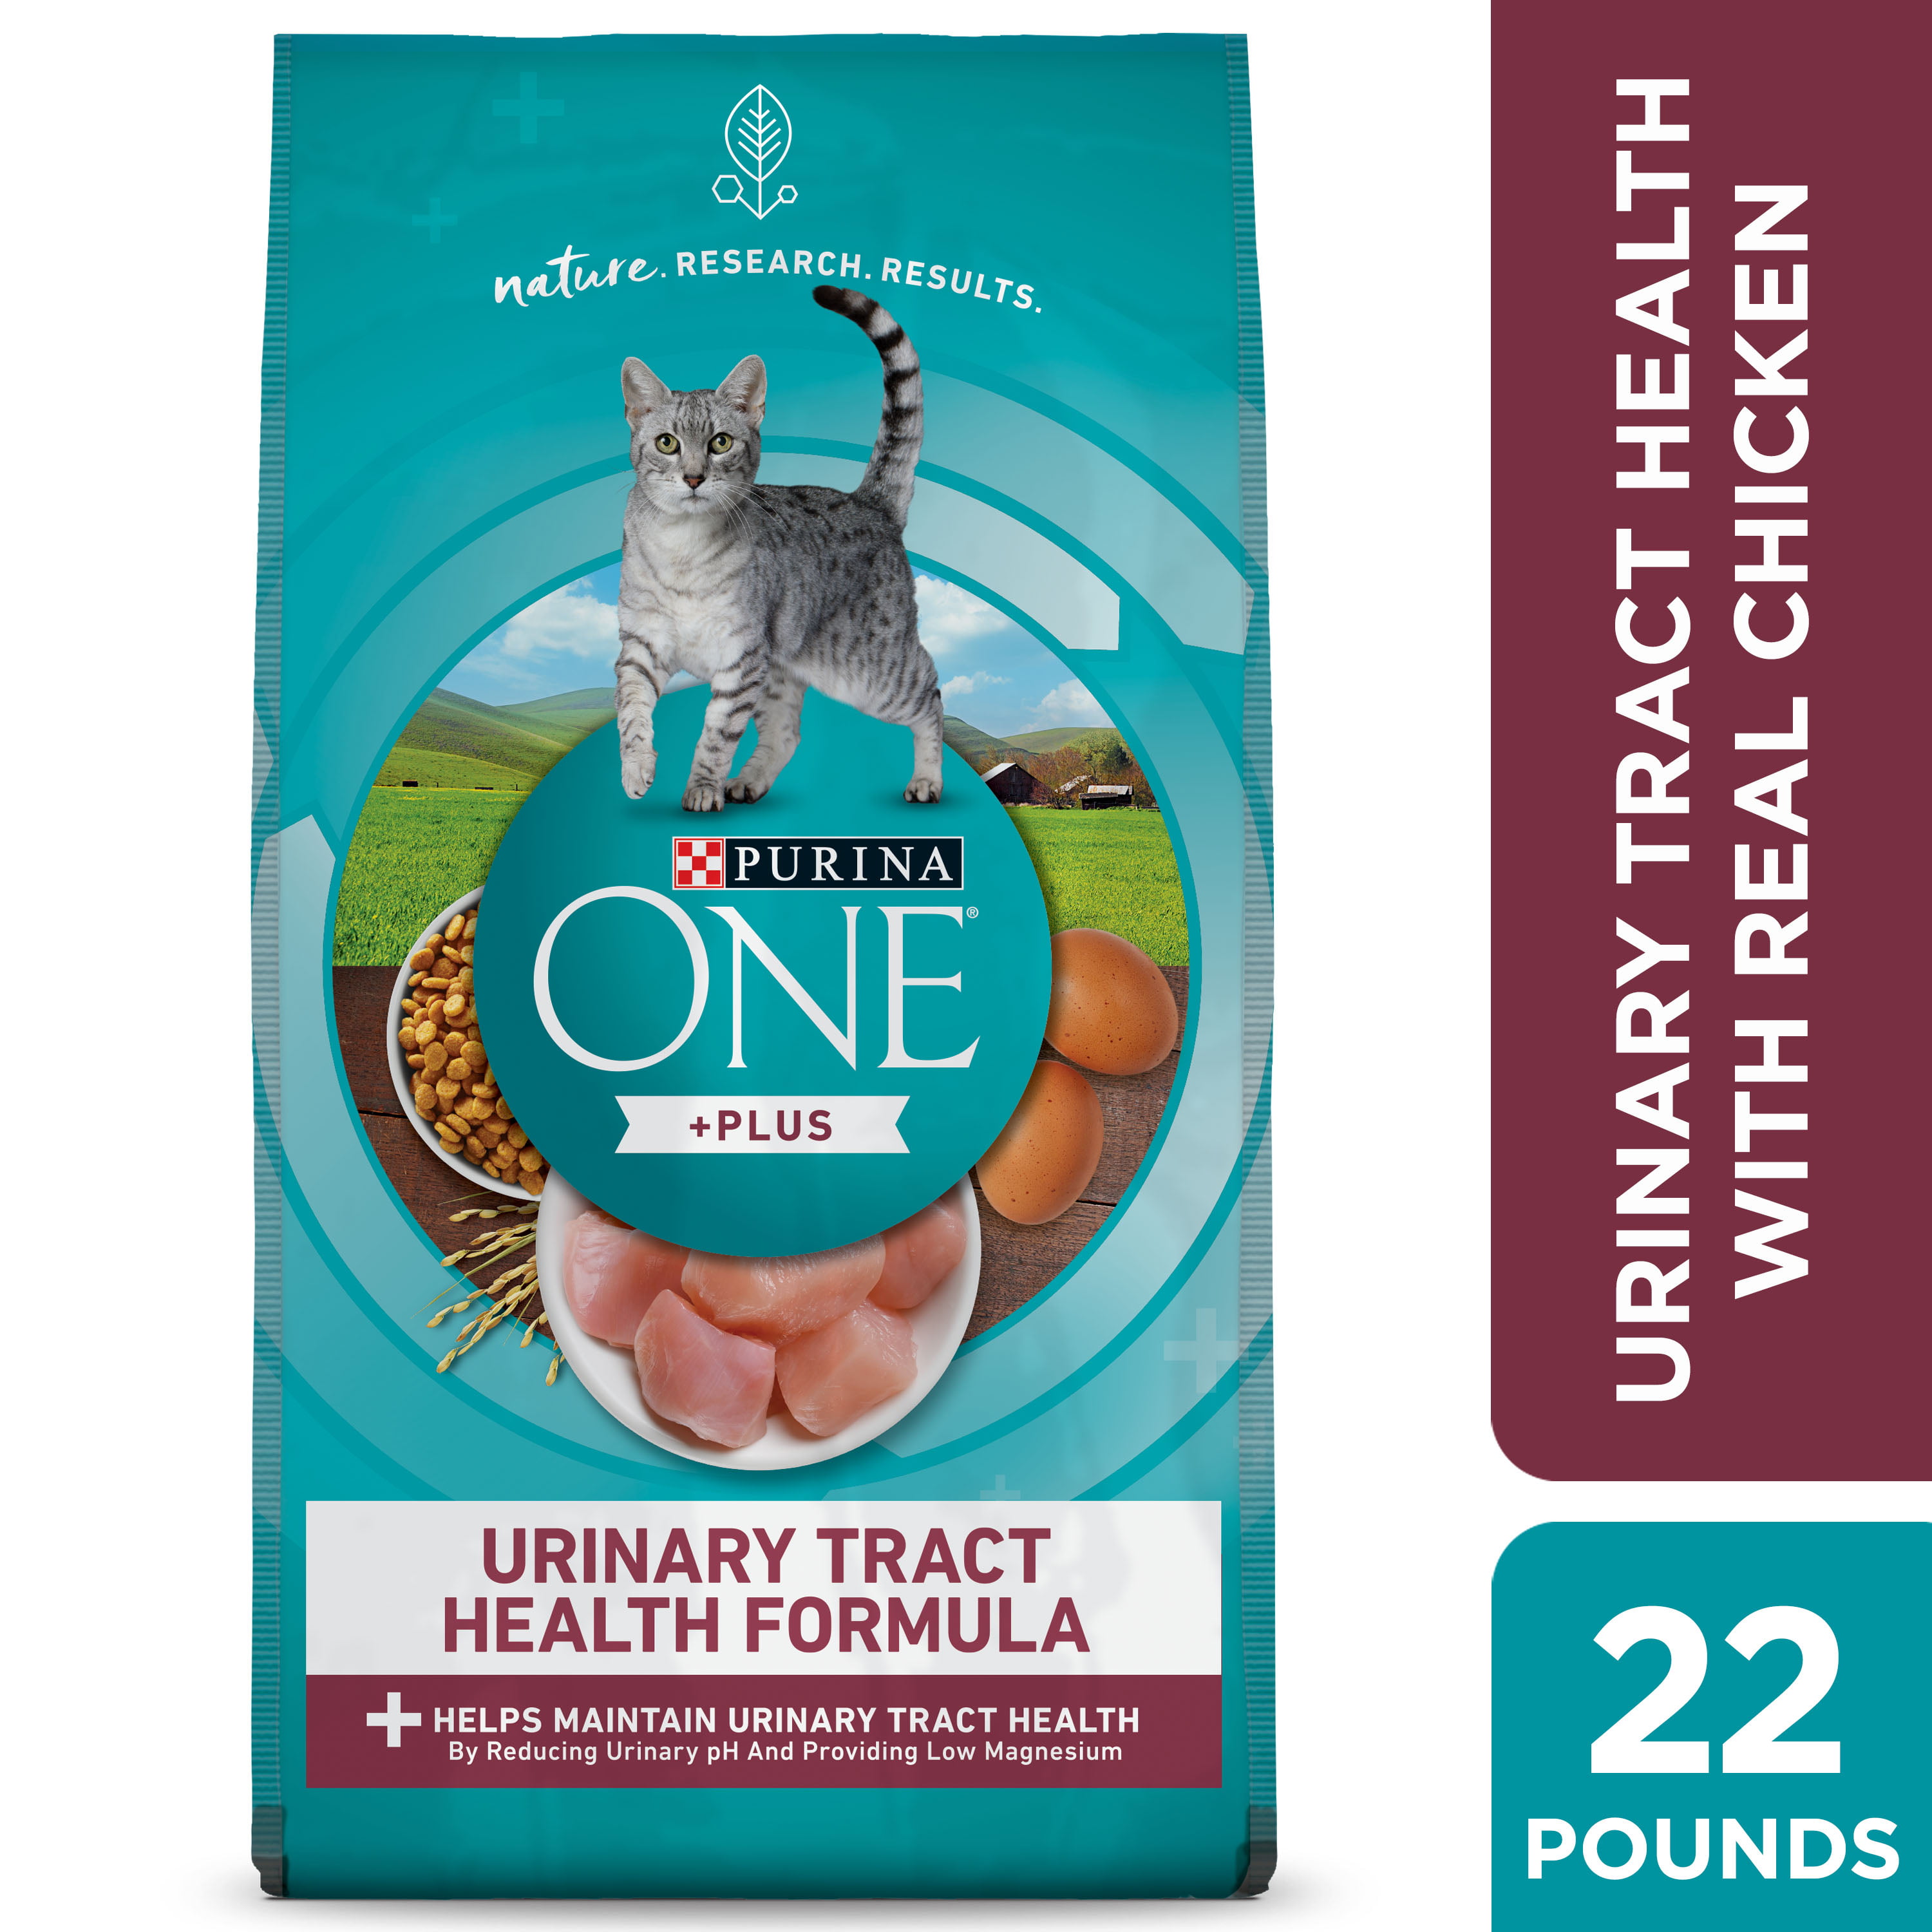 Purina ONE High Protein, Healthy Weight Dry Cat Food, +Plus Ideal